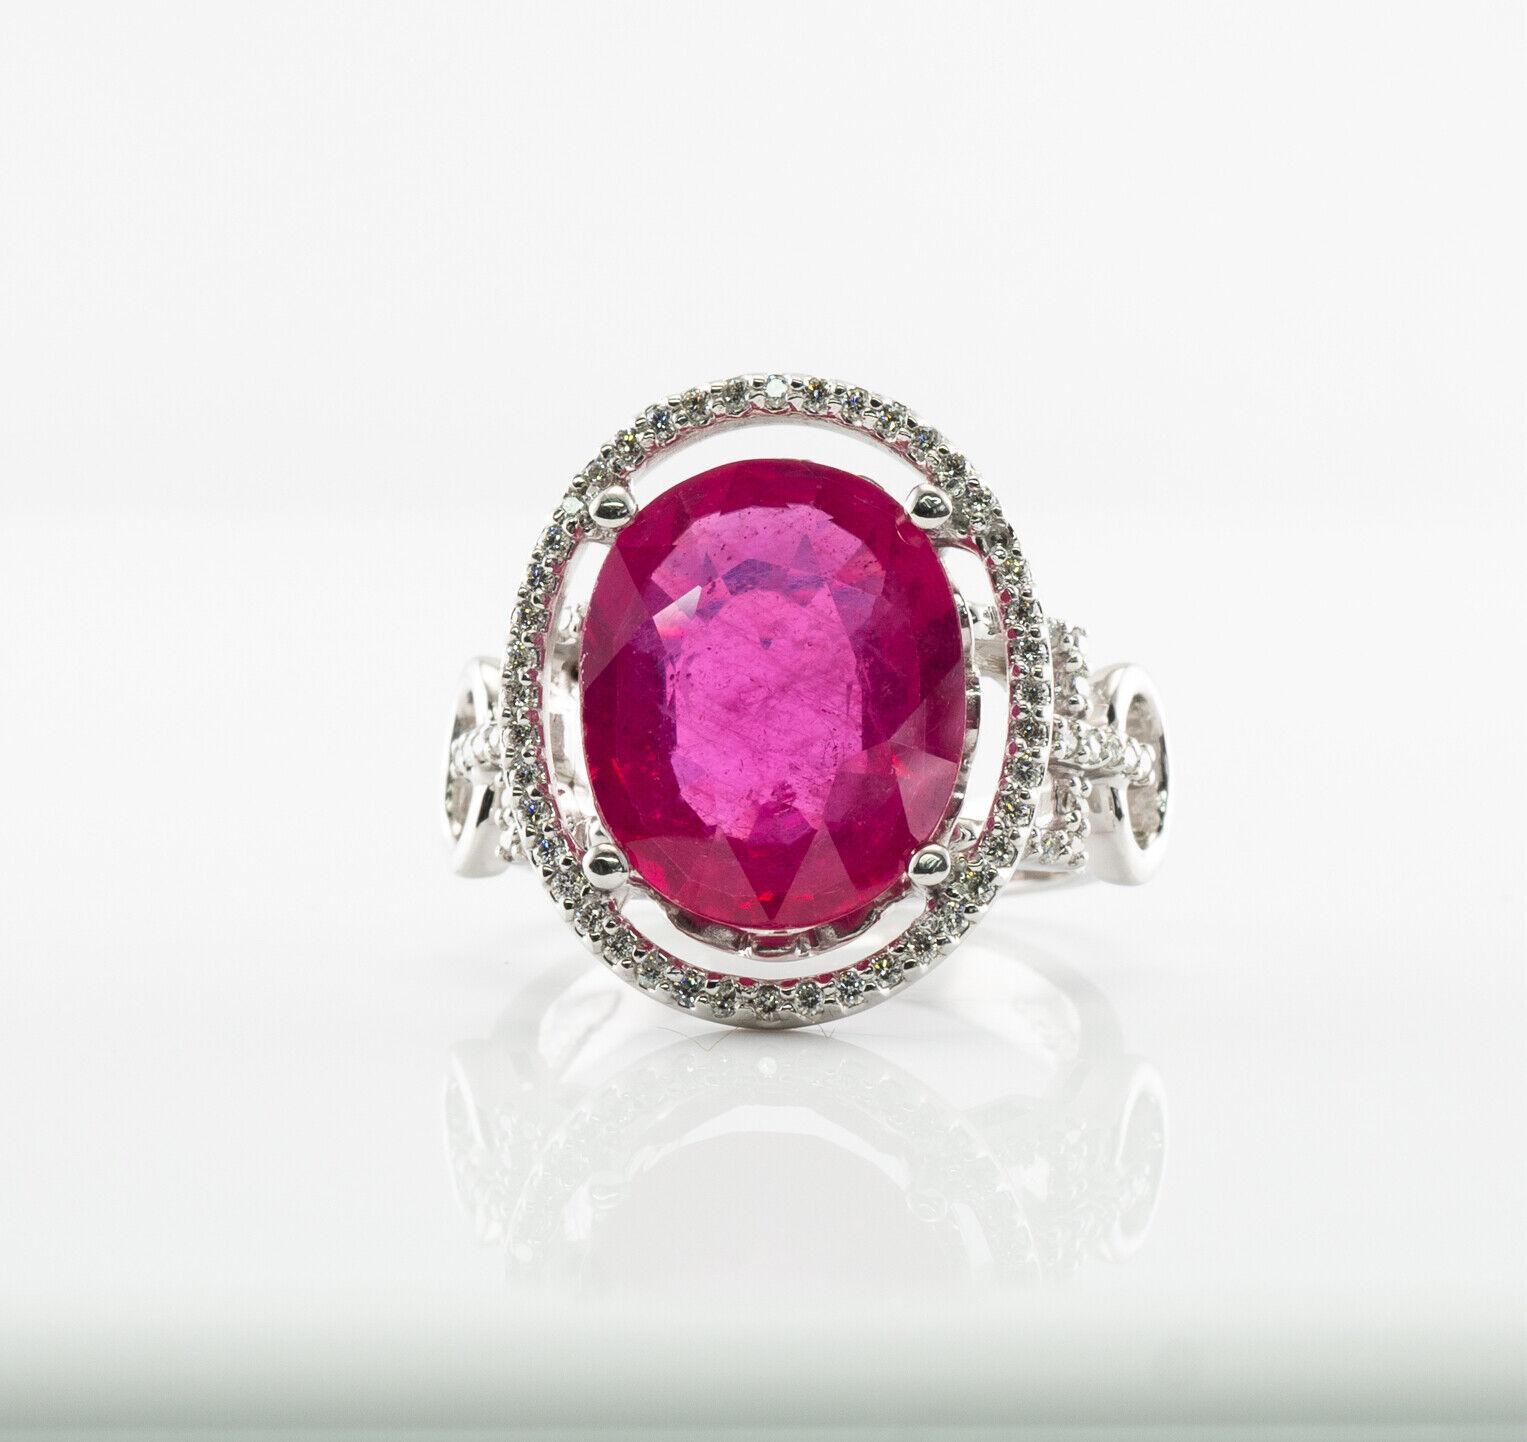 This gorgeous estate ring is finely crafted in solid 14K White gold and set with natural Earth mined Pink Ruby and diamonds. The center oval cut gem measures 14mm x 11mm (6.16 carats). This is a very good quality stone with great intensity and